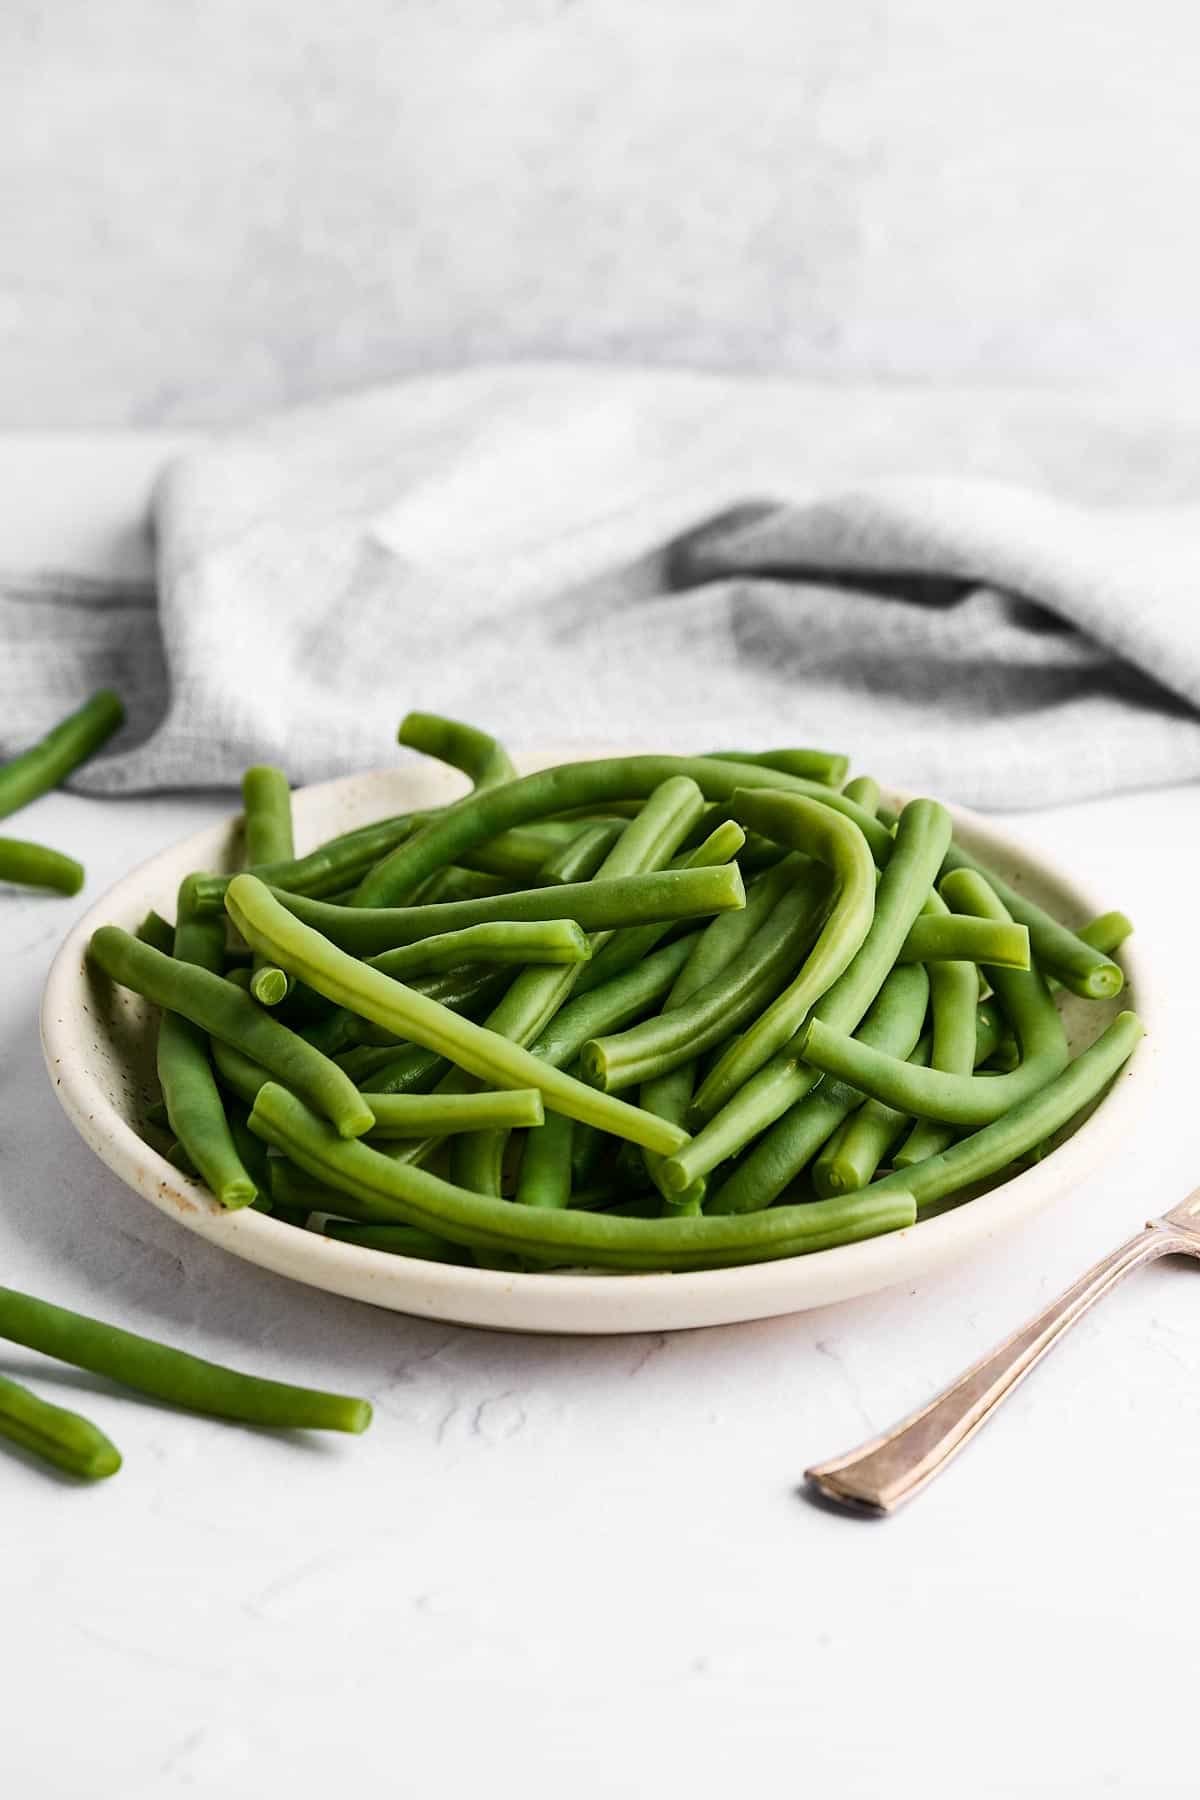 Blanched green beans.